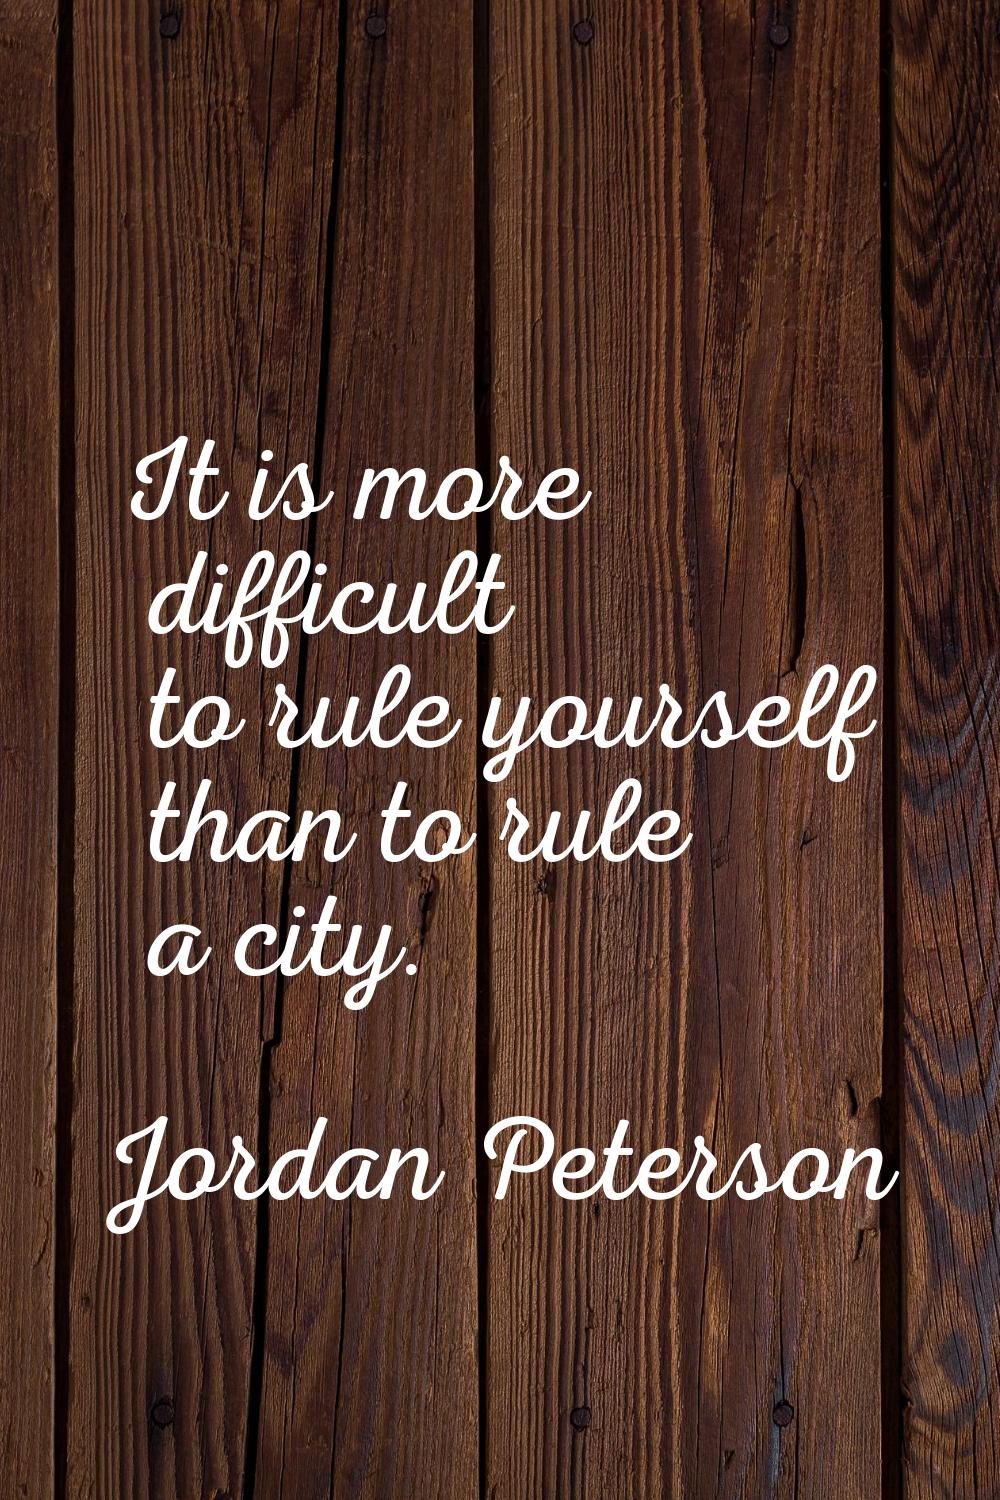 It is more difficult to rule yourself than to rule a city.